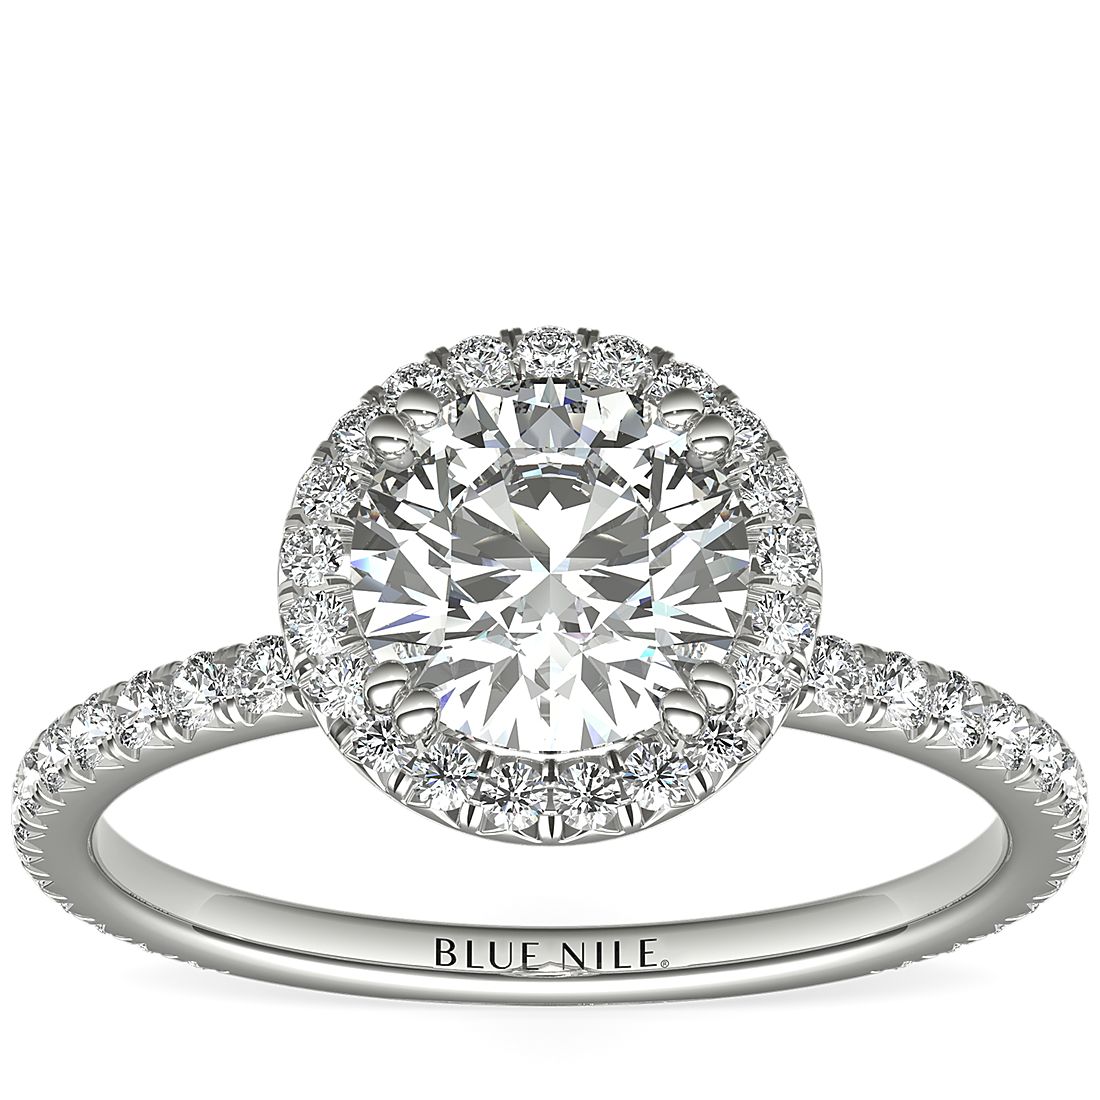 An engagement ring with a 1-carat round center diamond surrounded by french pavé set diamonds.